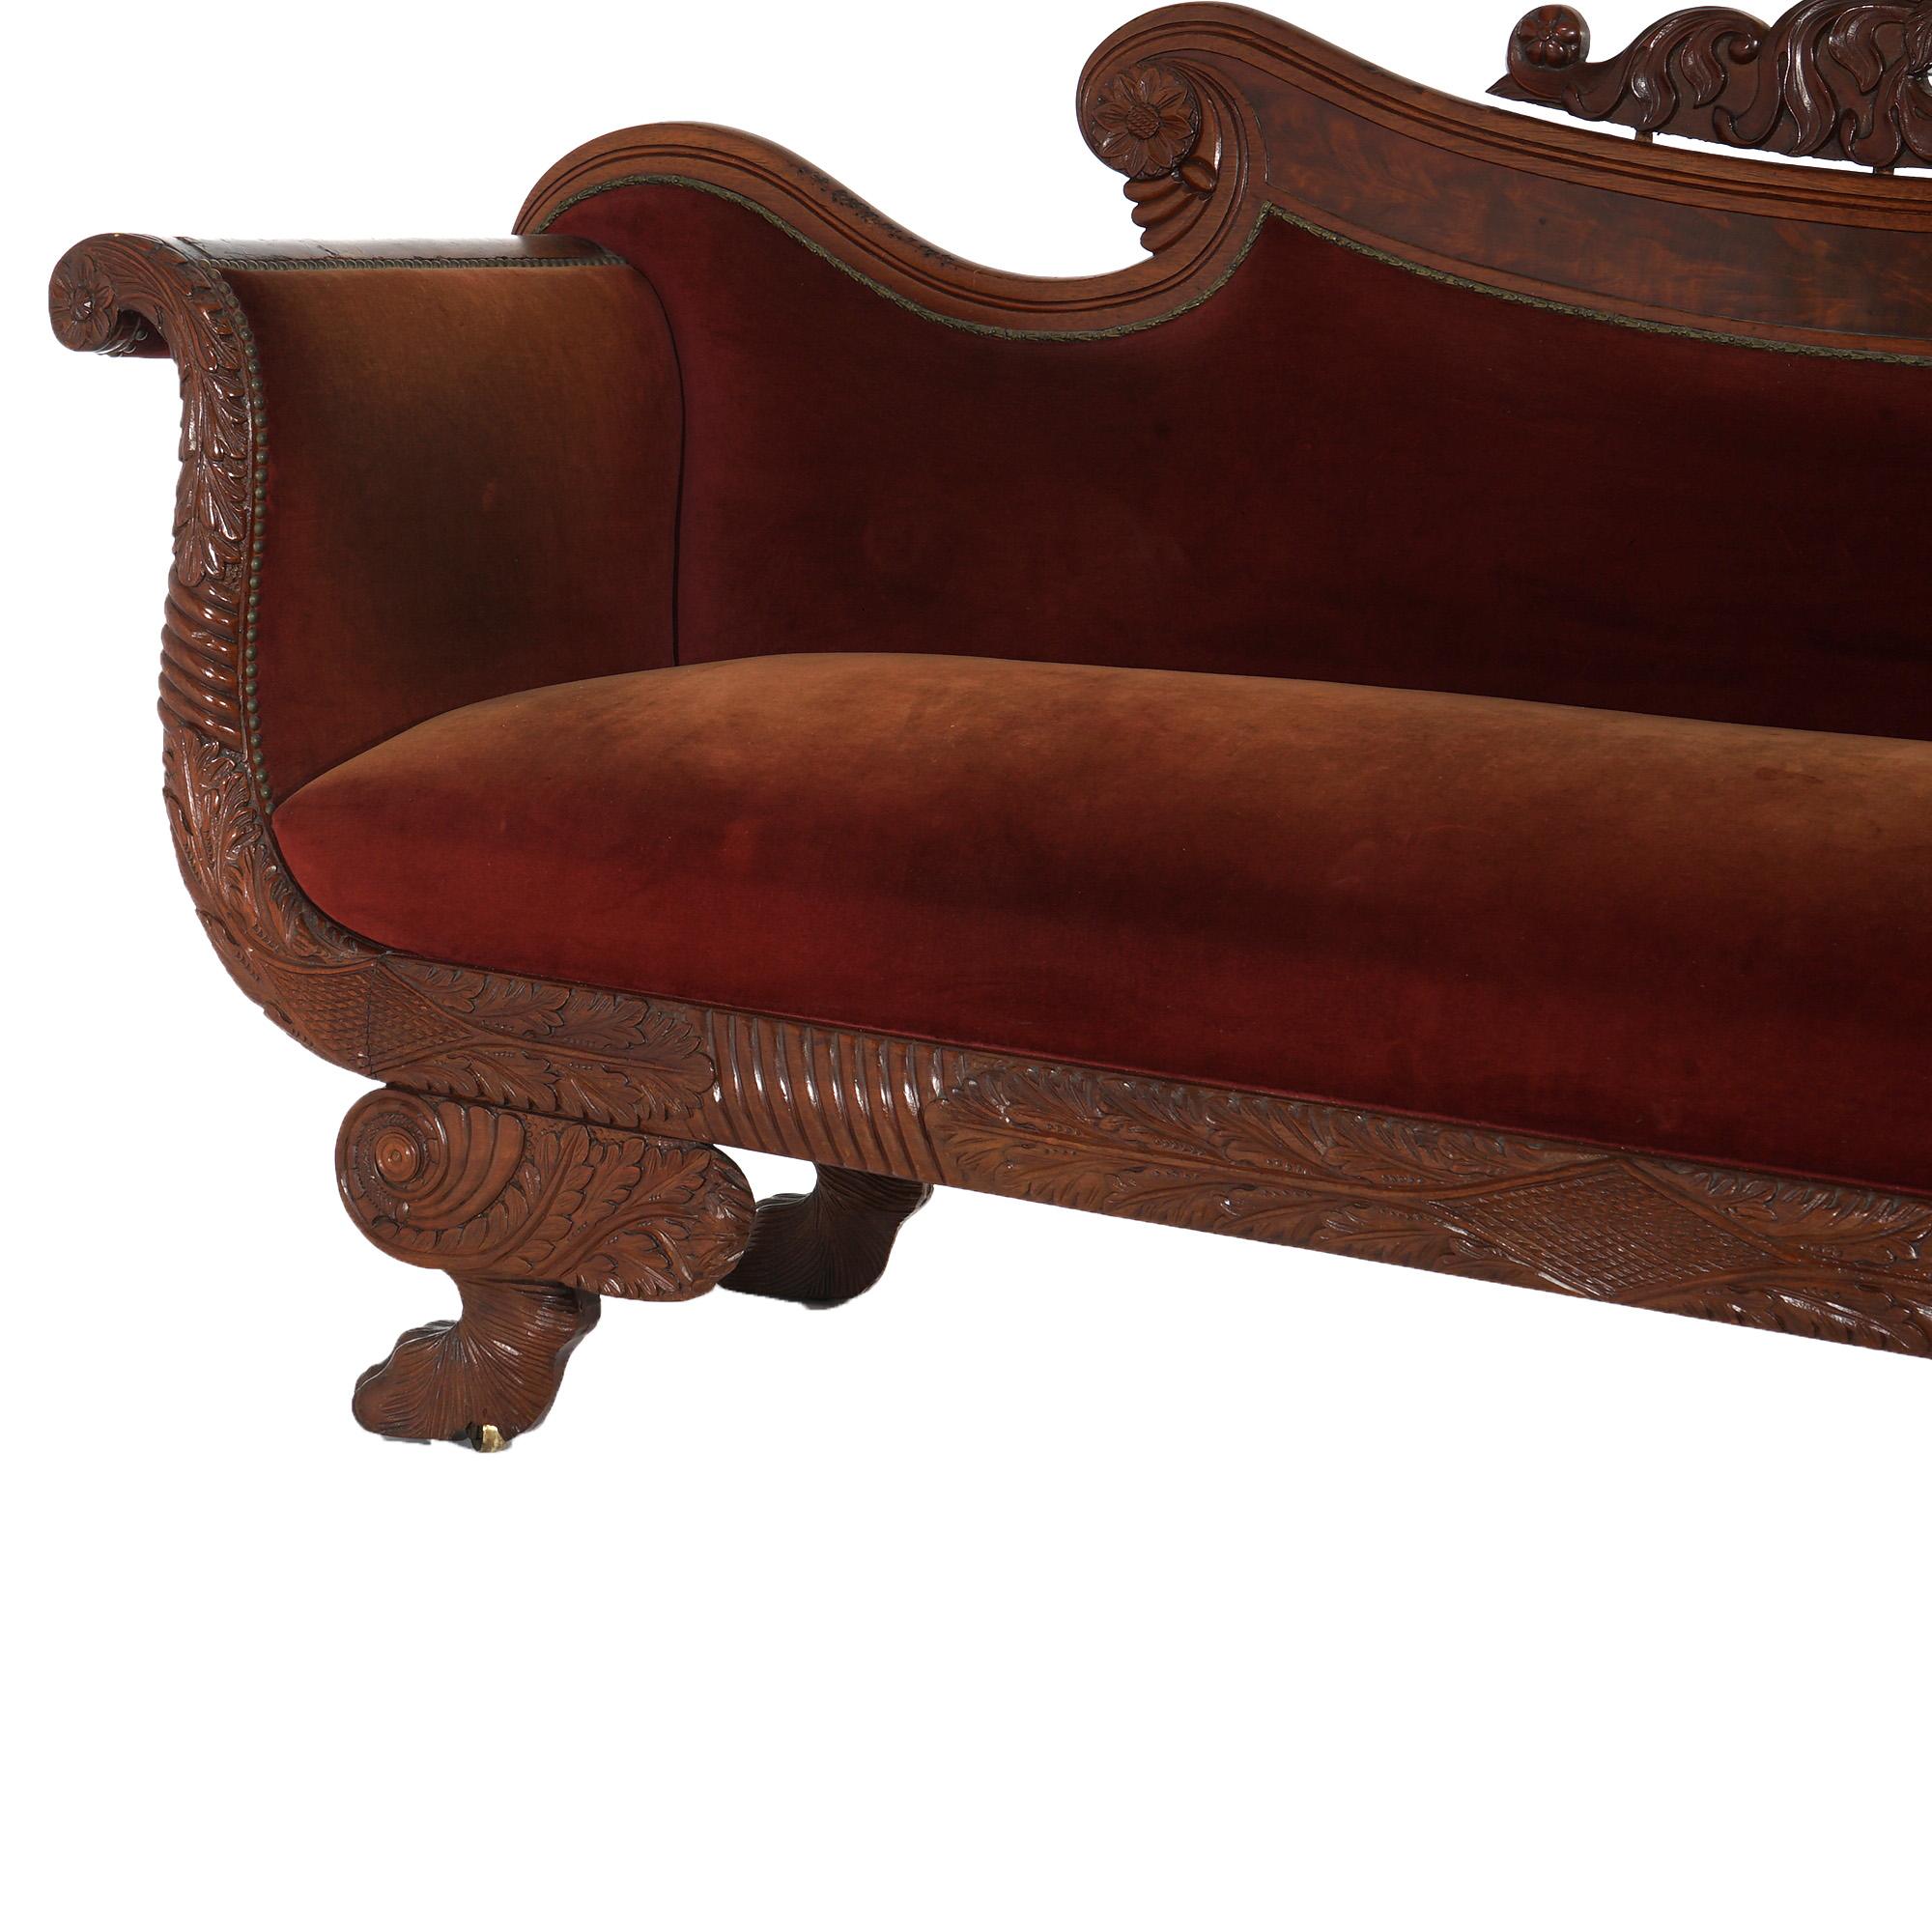 Antique Neoclassical American Empire Carved Walnut And Burl Sofa C1840 For Sale 2